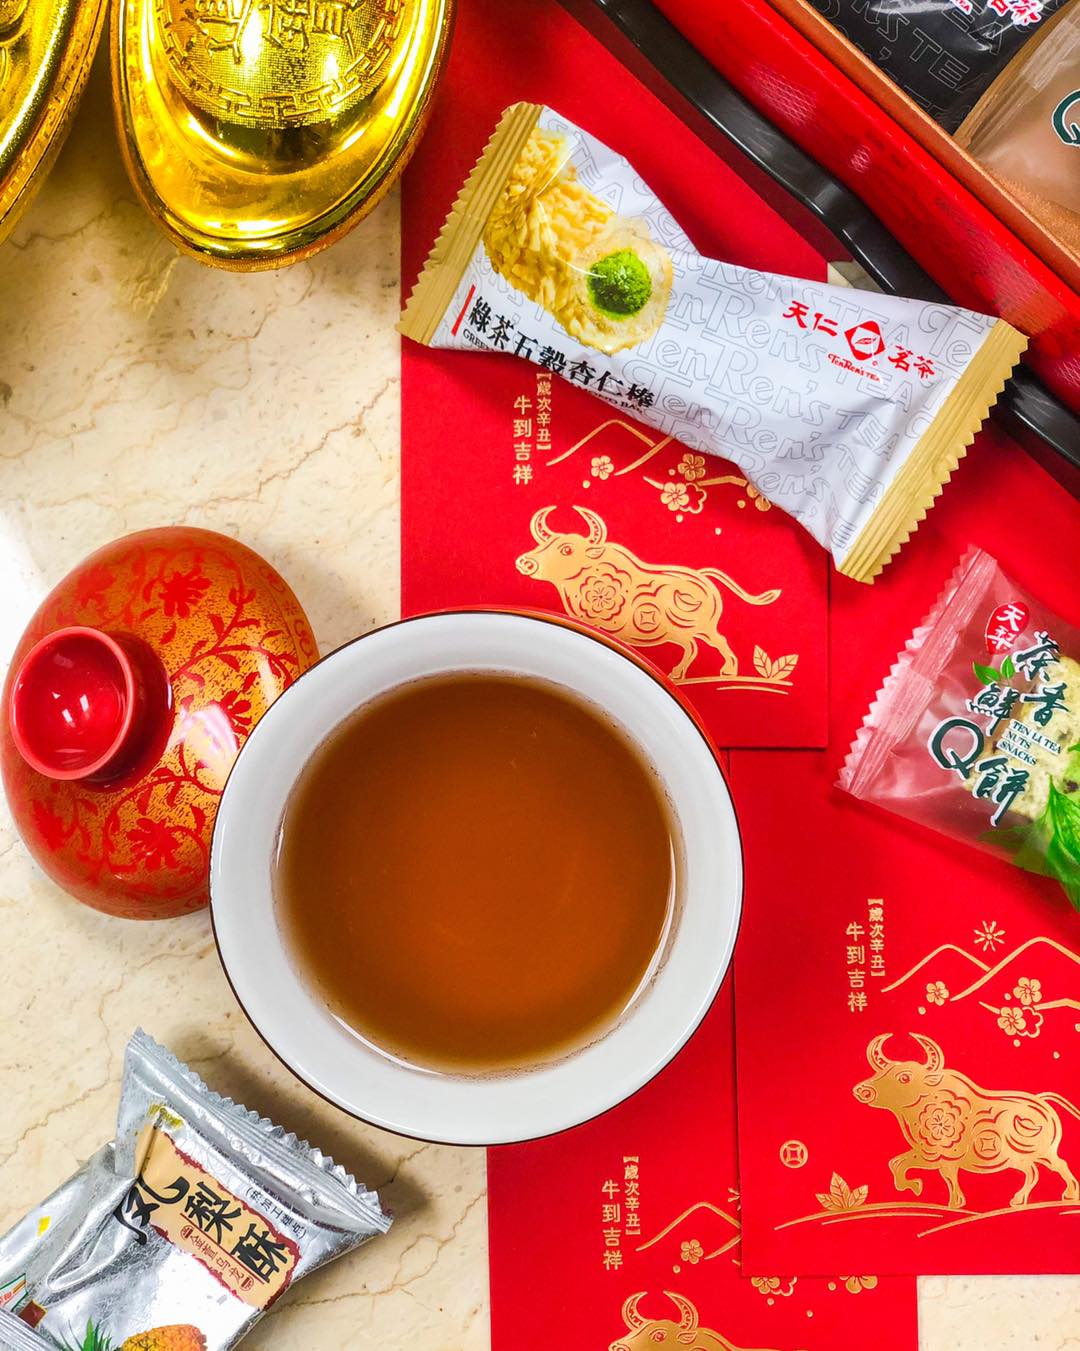 Happy Lunar New Year! May your year be one of good fortune, and may the year of the ox bring wellness and success to all areas of your life!  Be sure to check out our《RED POCKET GIVEAWAY》by visiting our store or order at www.tenrenstea.com for online order. Available from Feb. 11 til Feb. 21 and only at:...